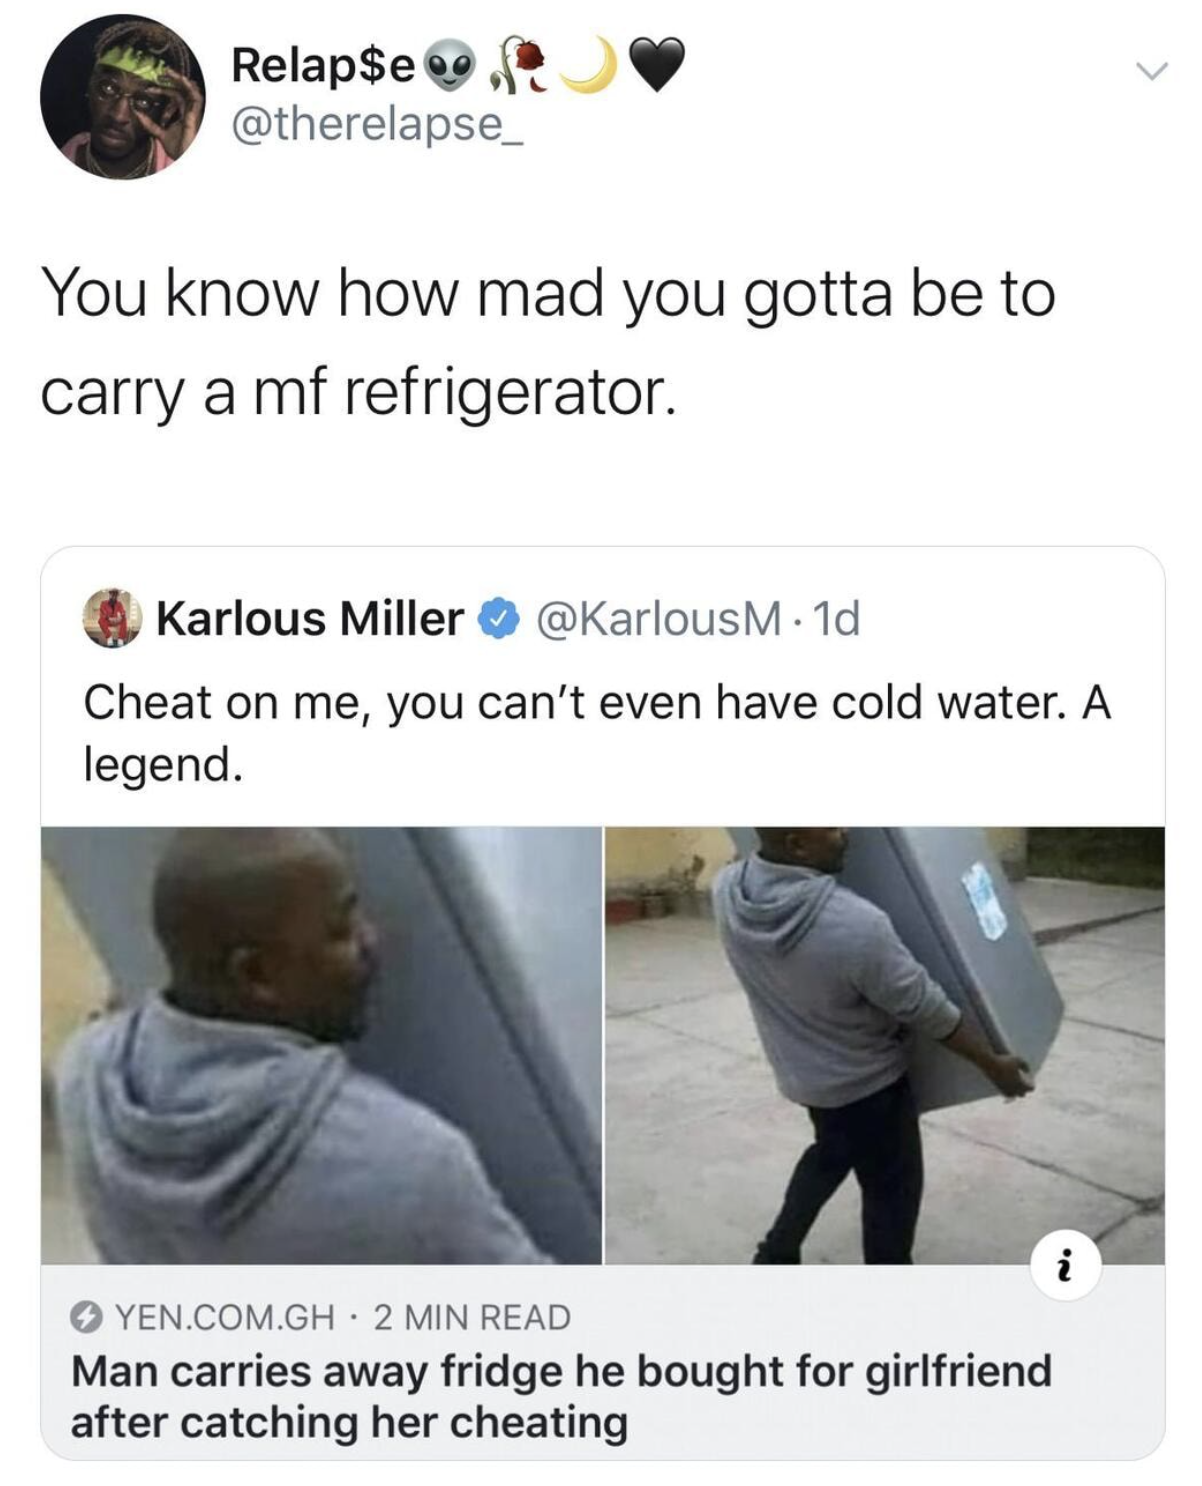 tweet about a man carrying out a fridge from a cheating girlfriend